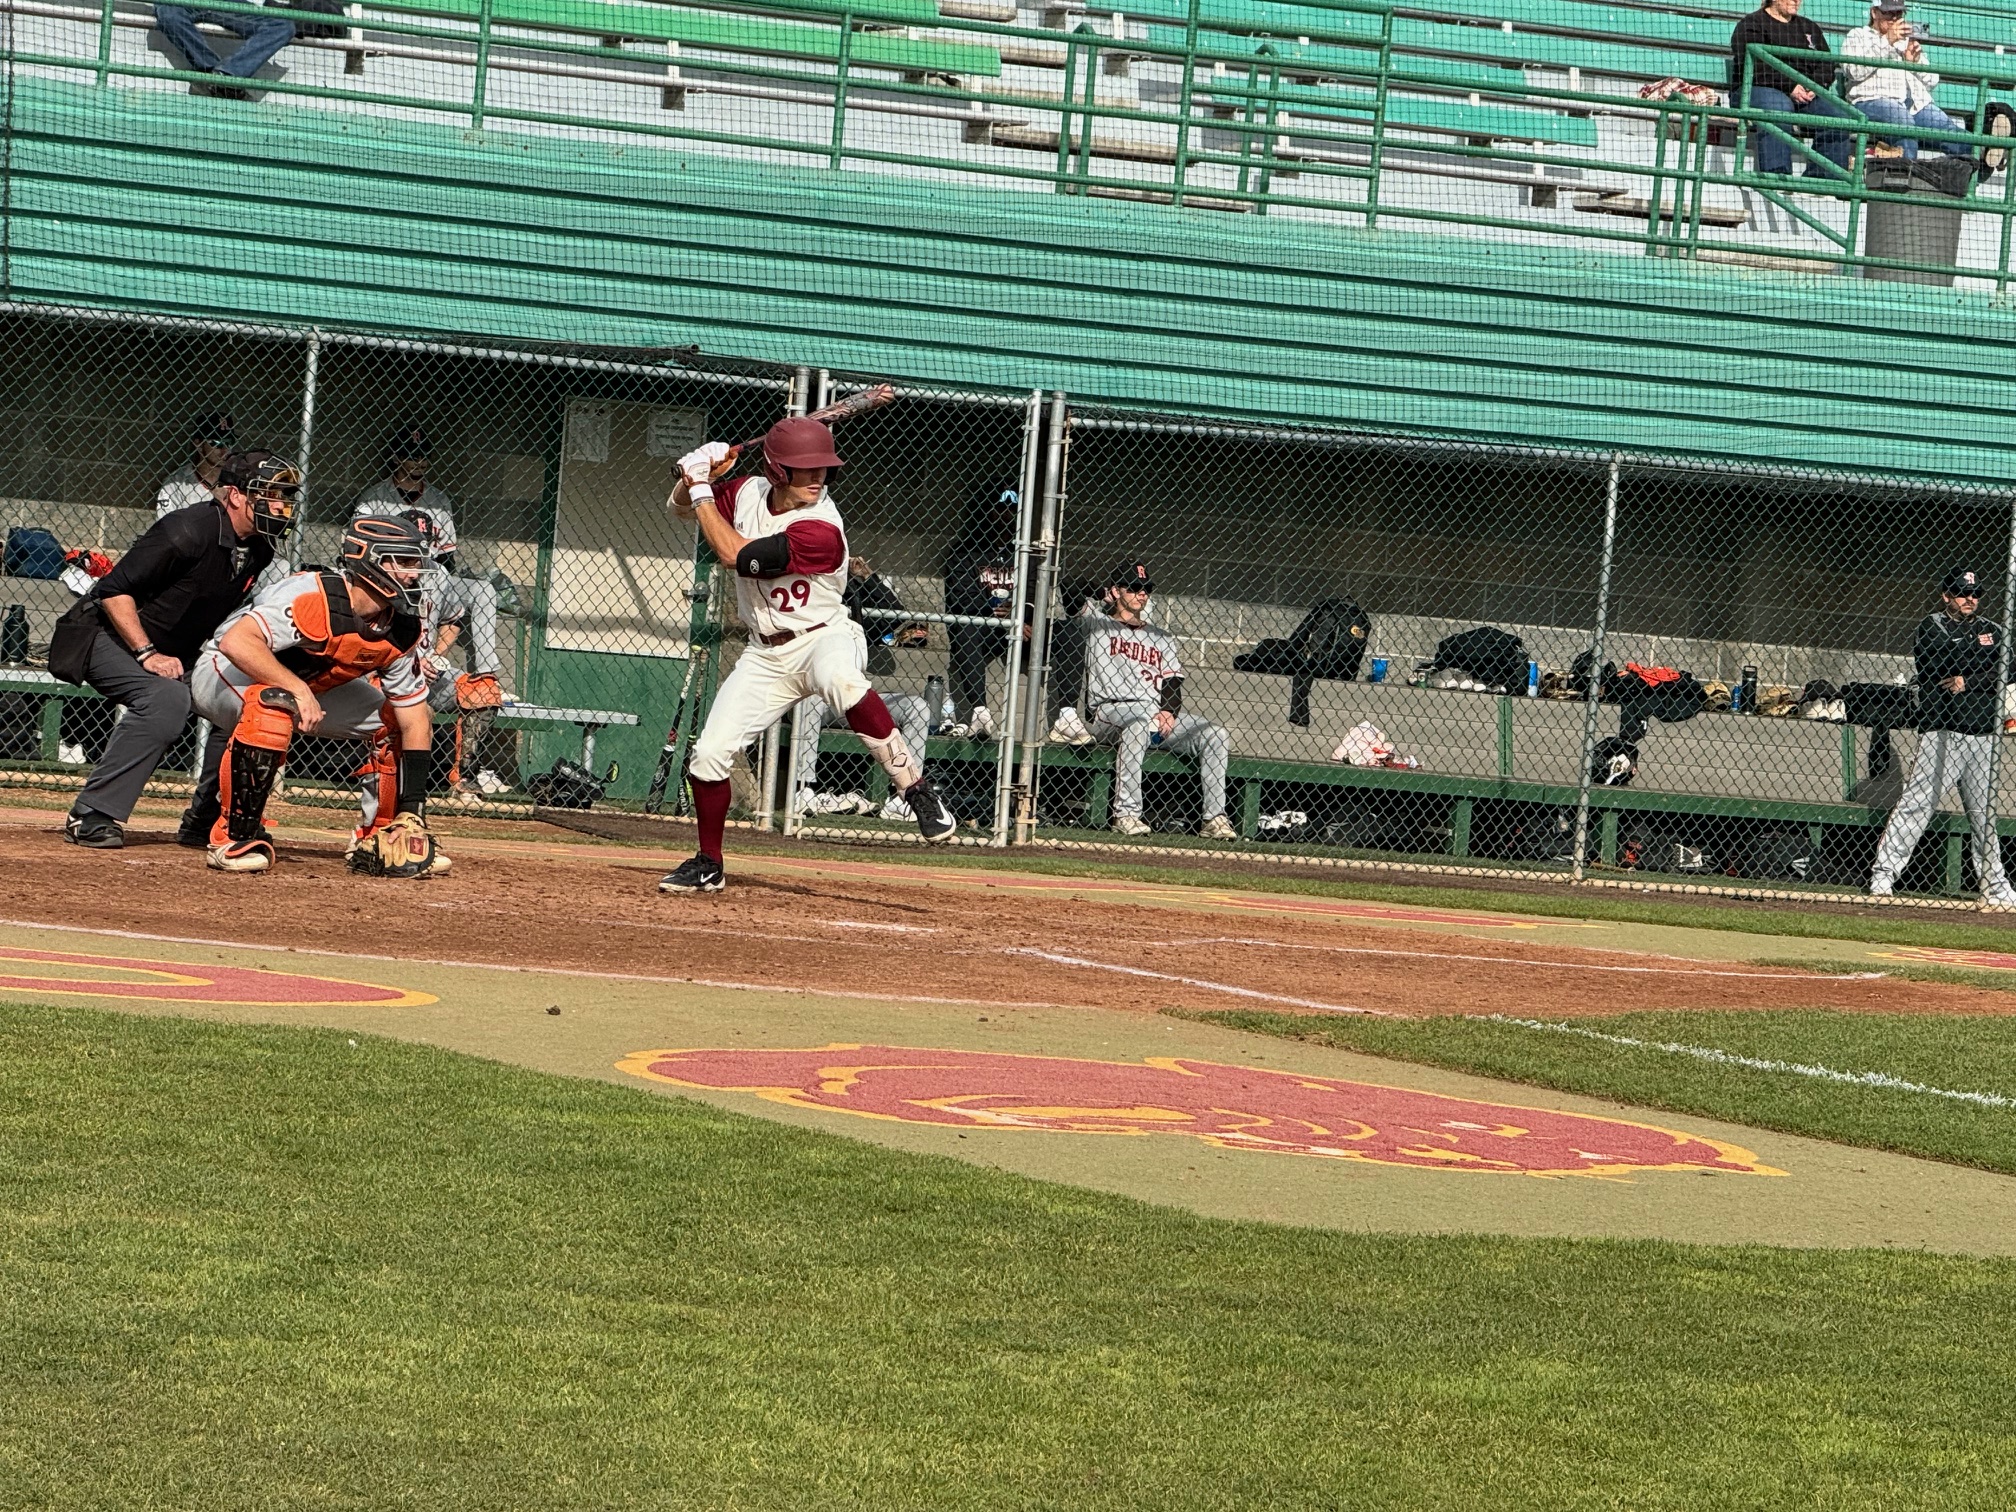 Feather River beats the Panthers 7-1 in game one of the DH; Barry (2x2) and Blakely (2x2) with a 3B were the top hitters